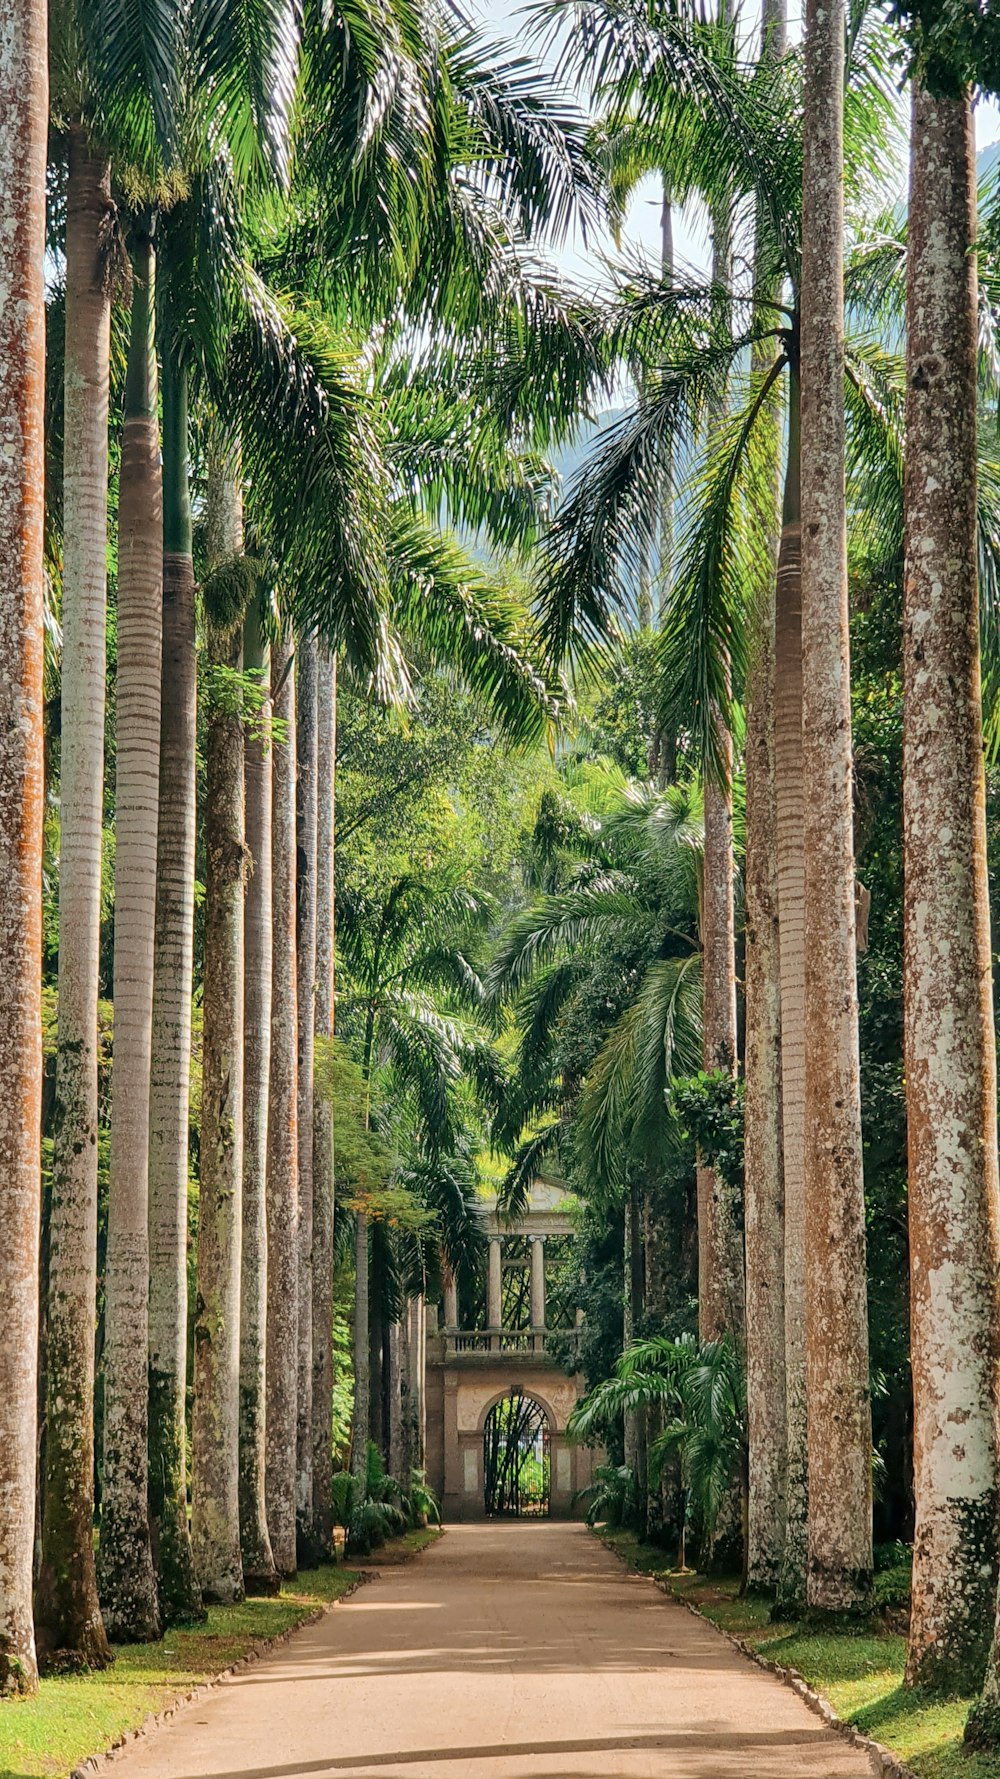 a dirt road surrounded by tall palm trees